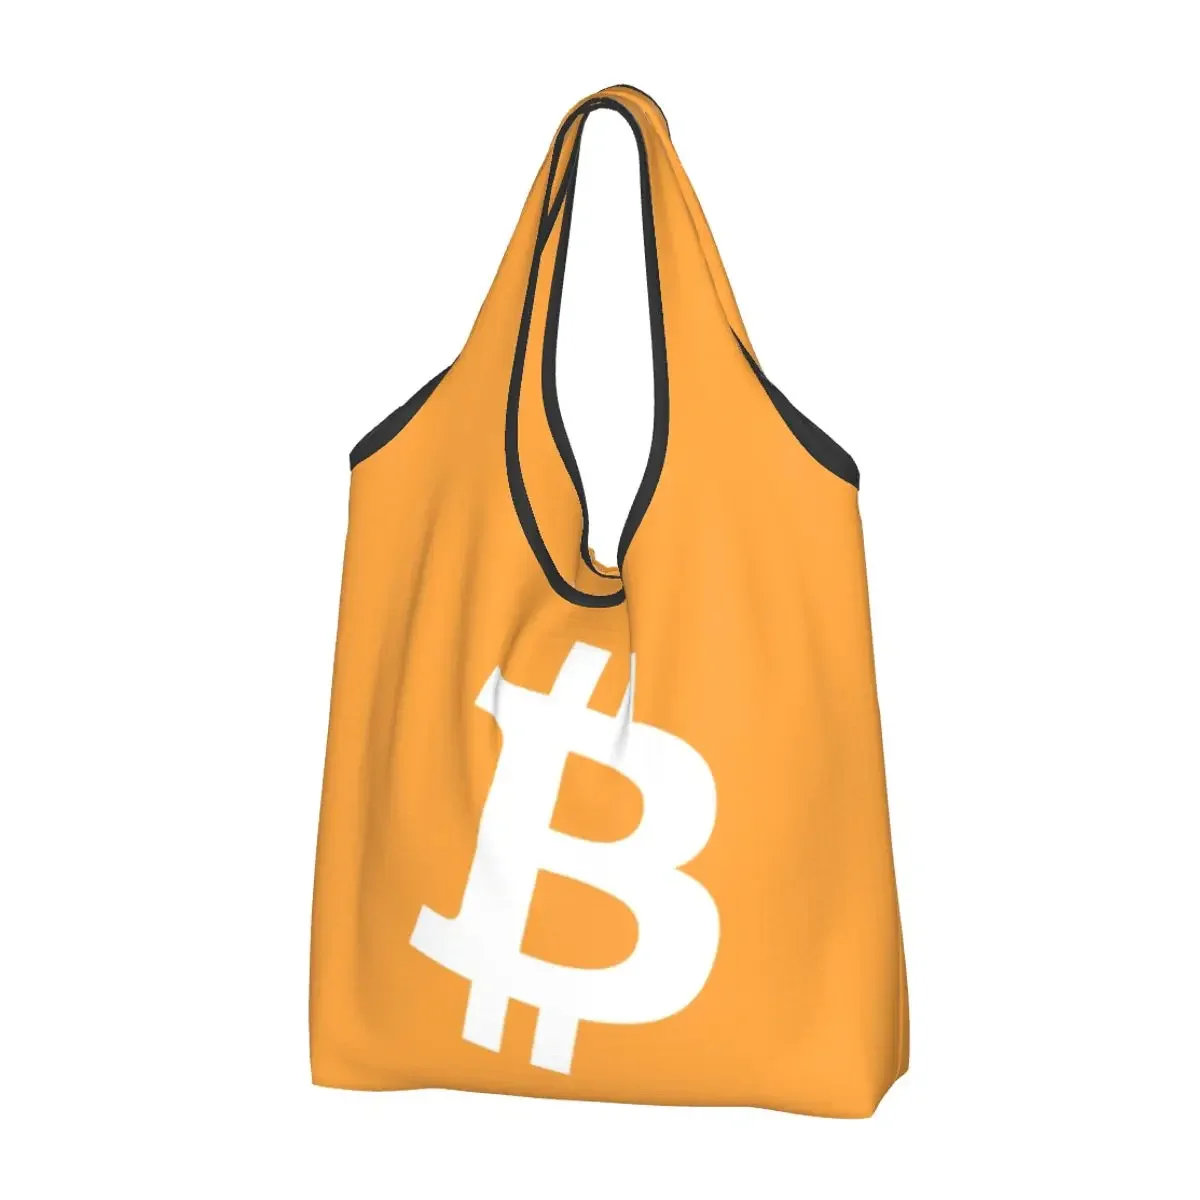 

Bitcoin Grocery Tote Shopping Bags Women Cute BTC Cryptocurrency Shopper Shoulder Bags Large Capacity Handbags